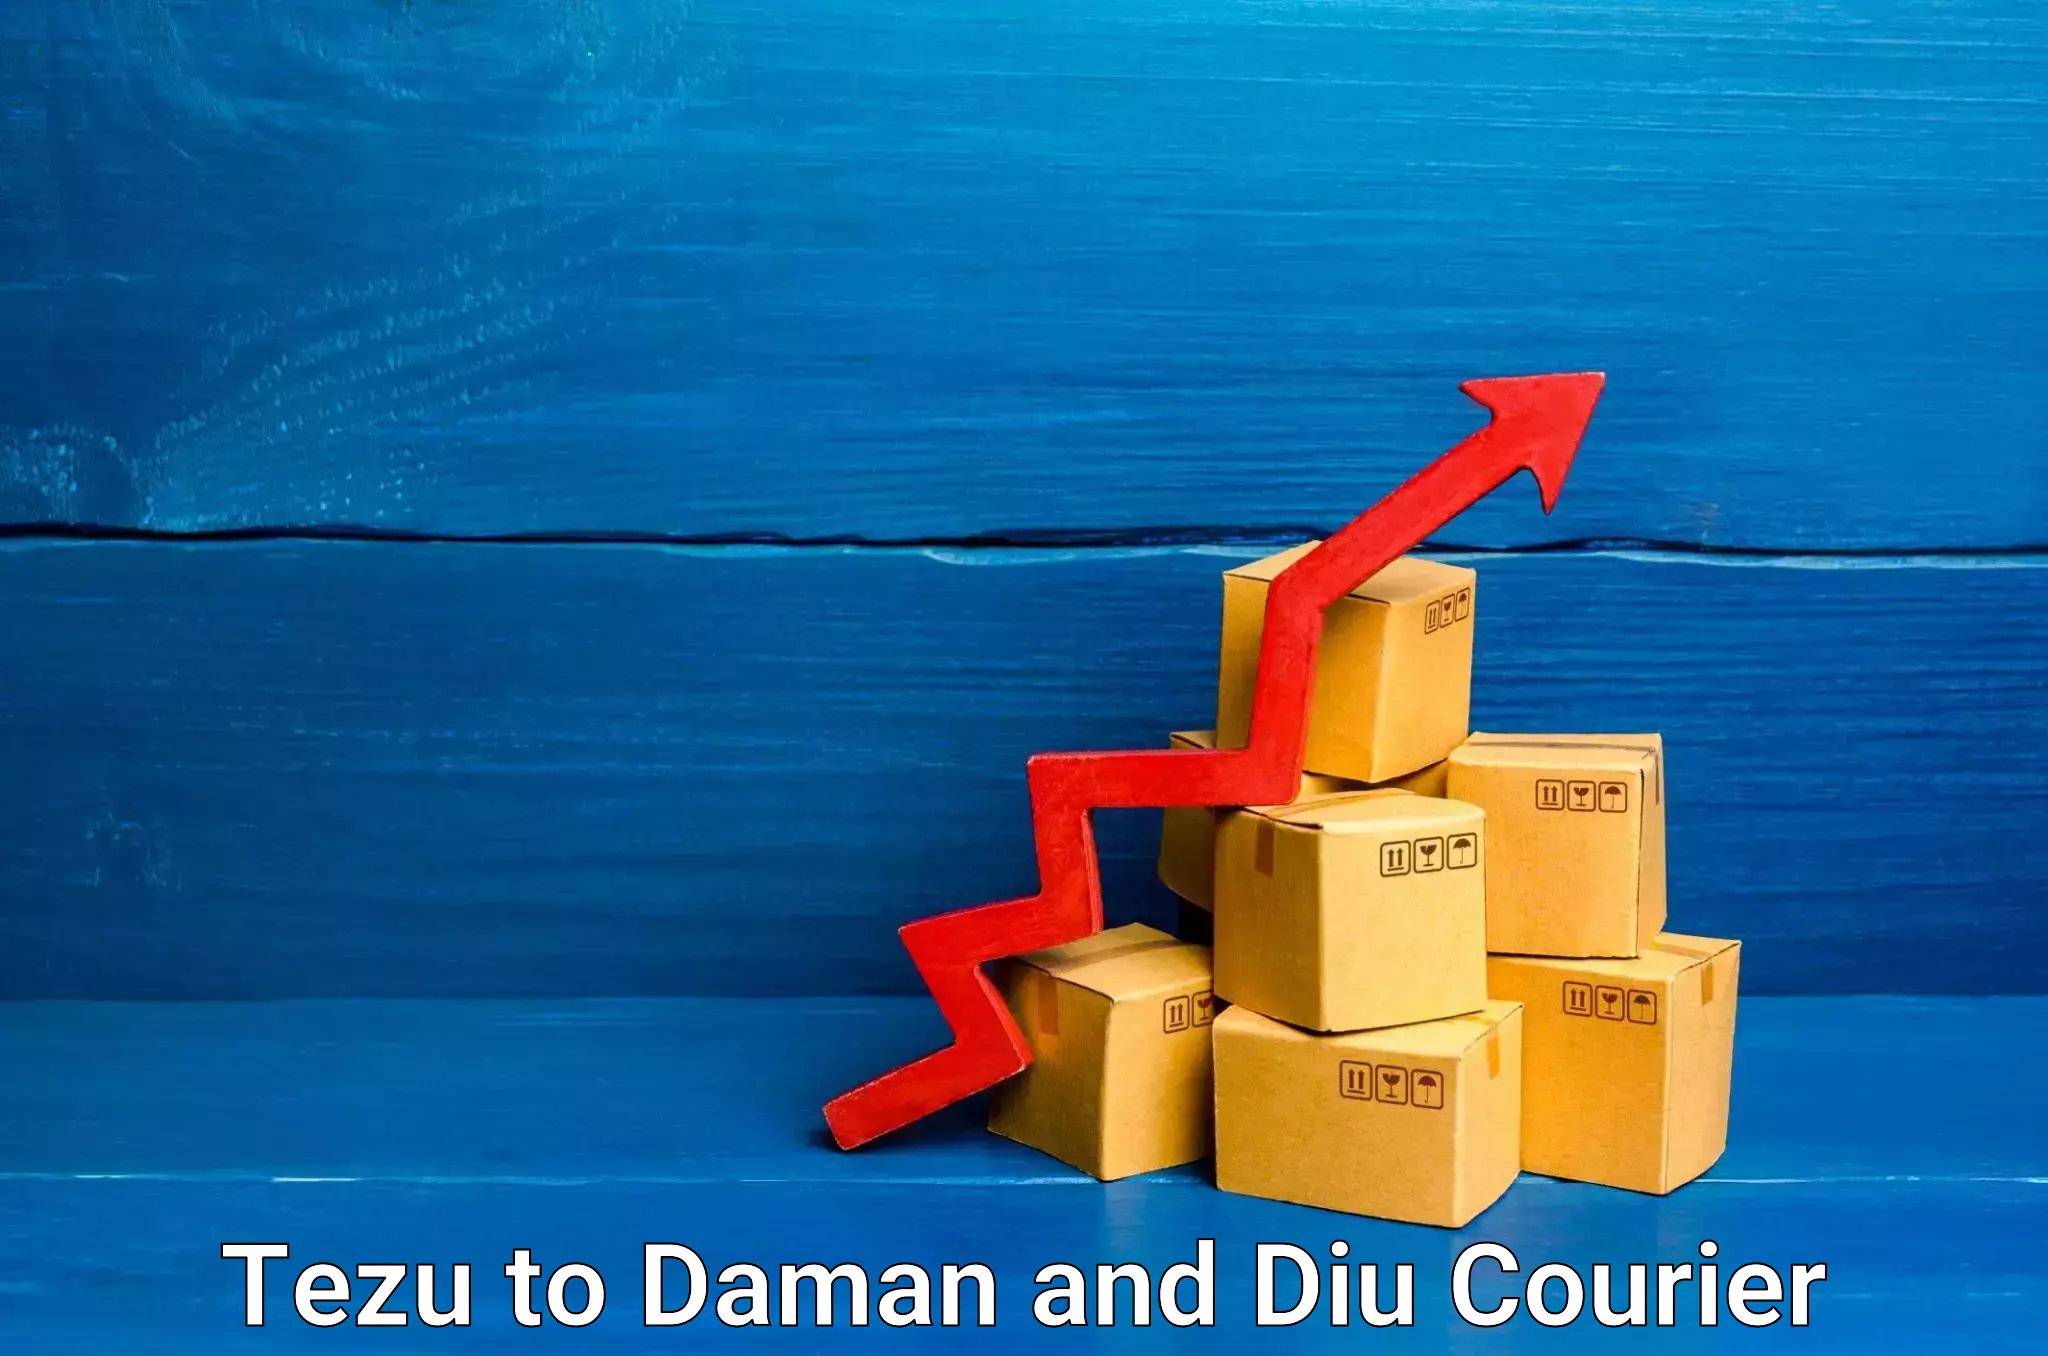 Reliable courier service Tezu to Daman and Diu